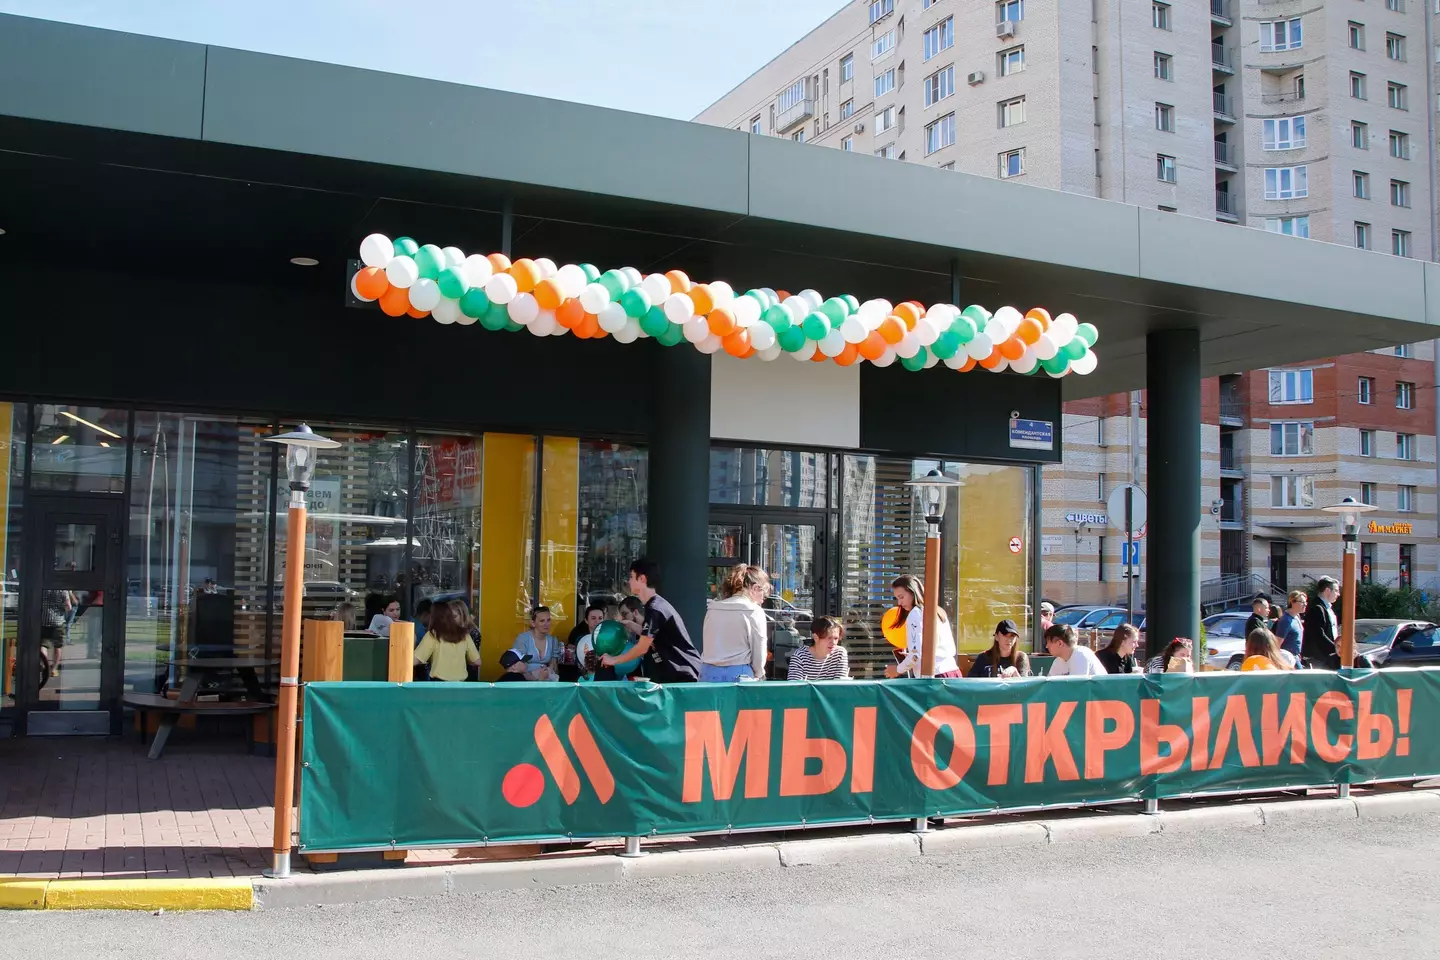 'Tasty and that's it' replaced McDonald's in Russia.